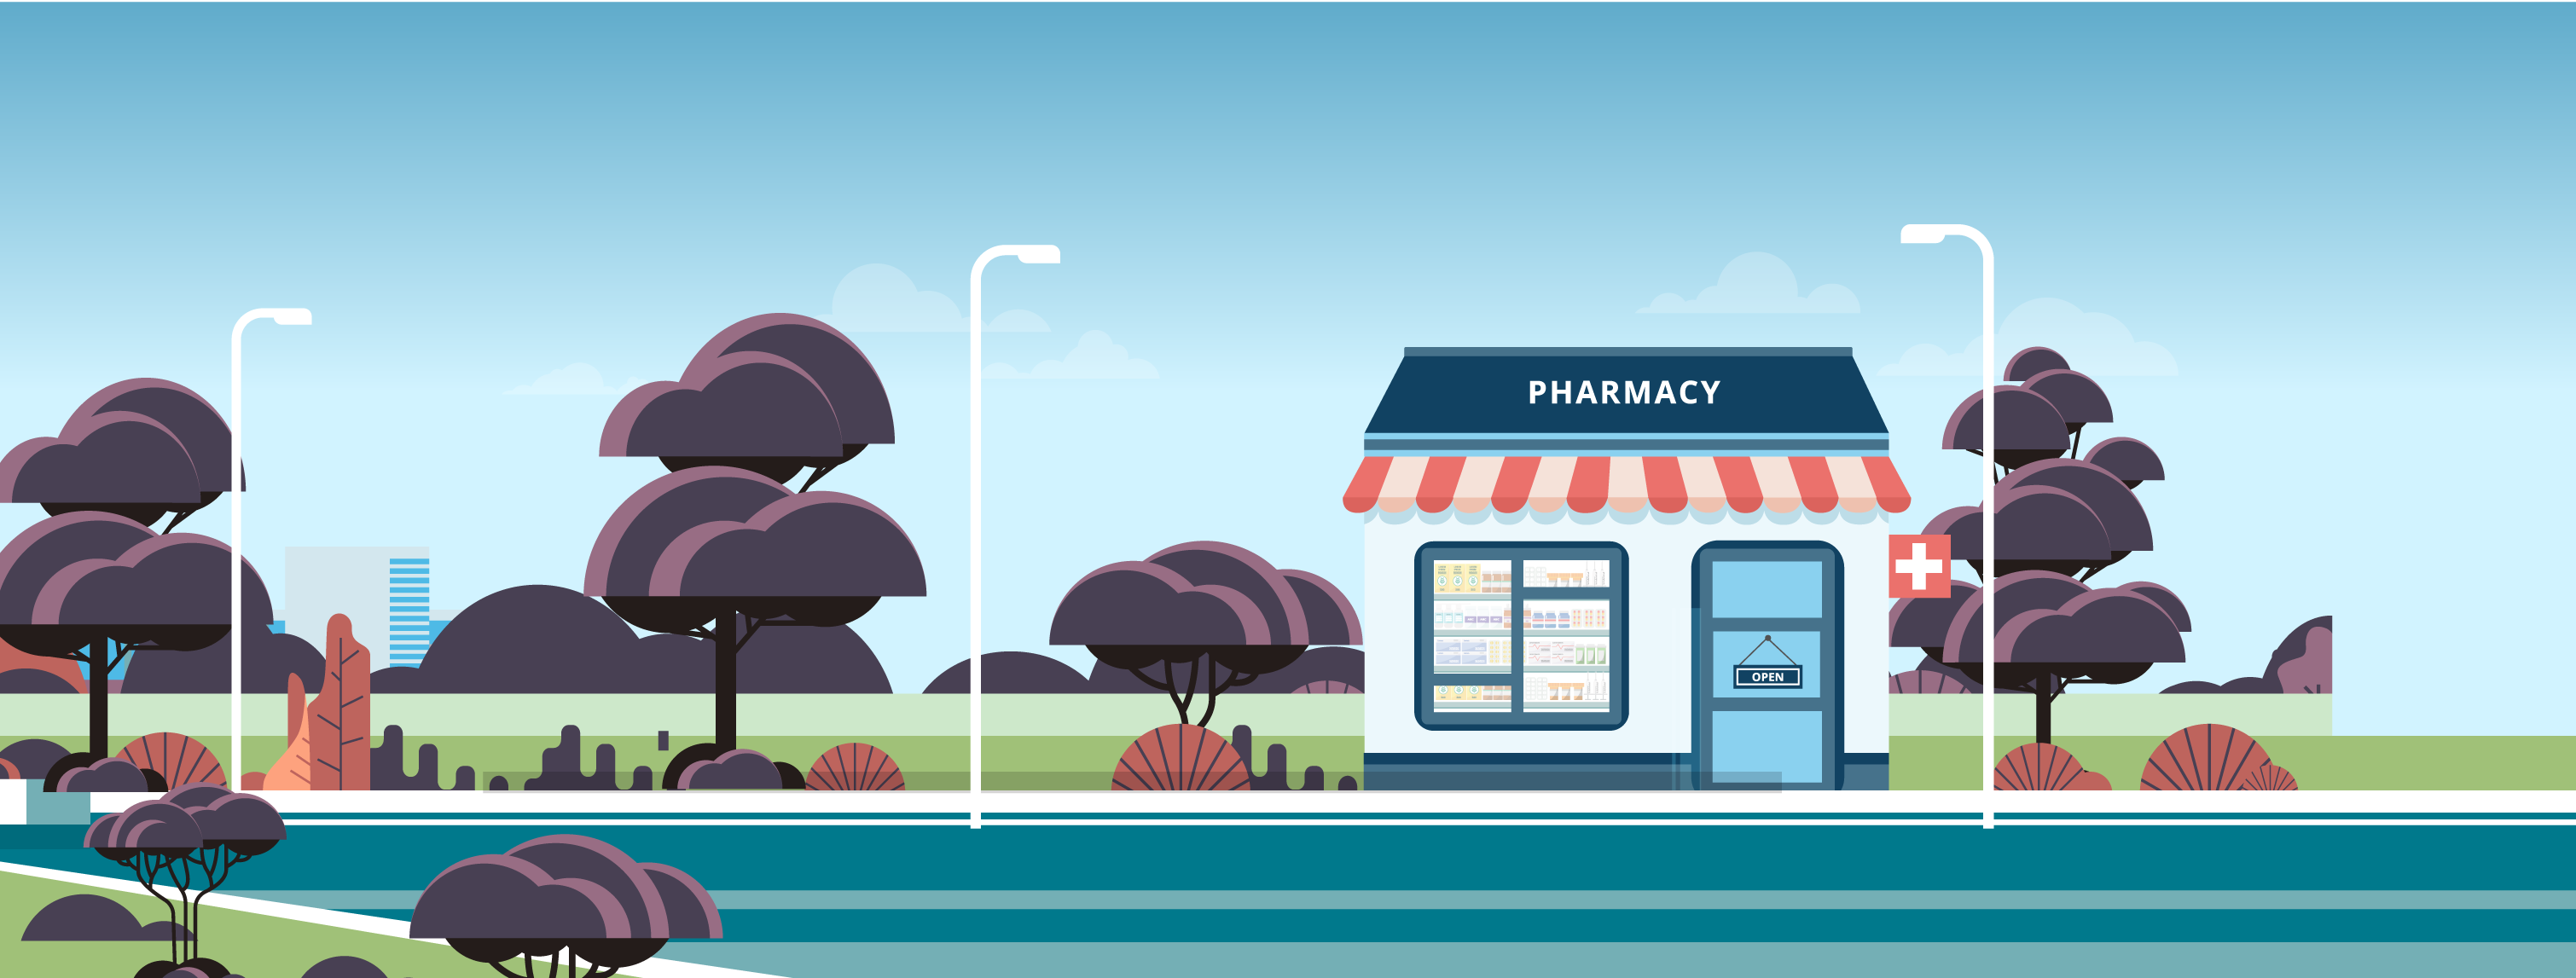 Illustration of a small pharmacy